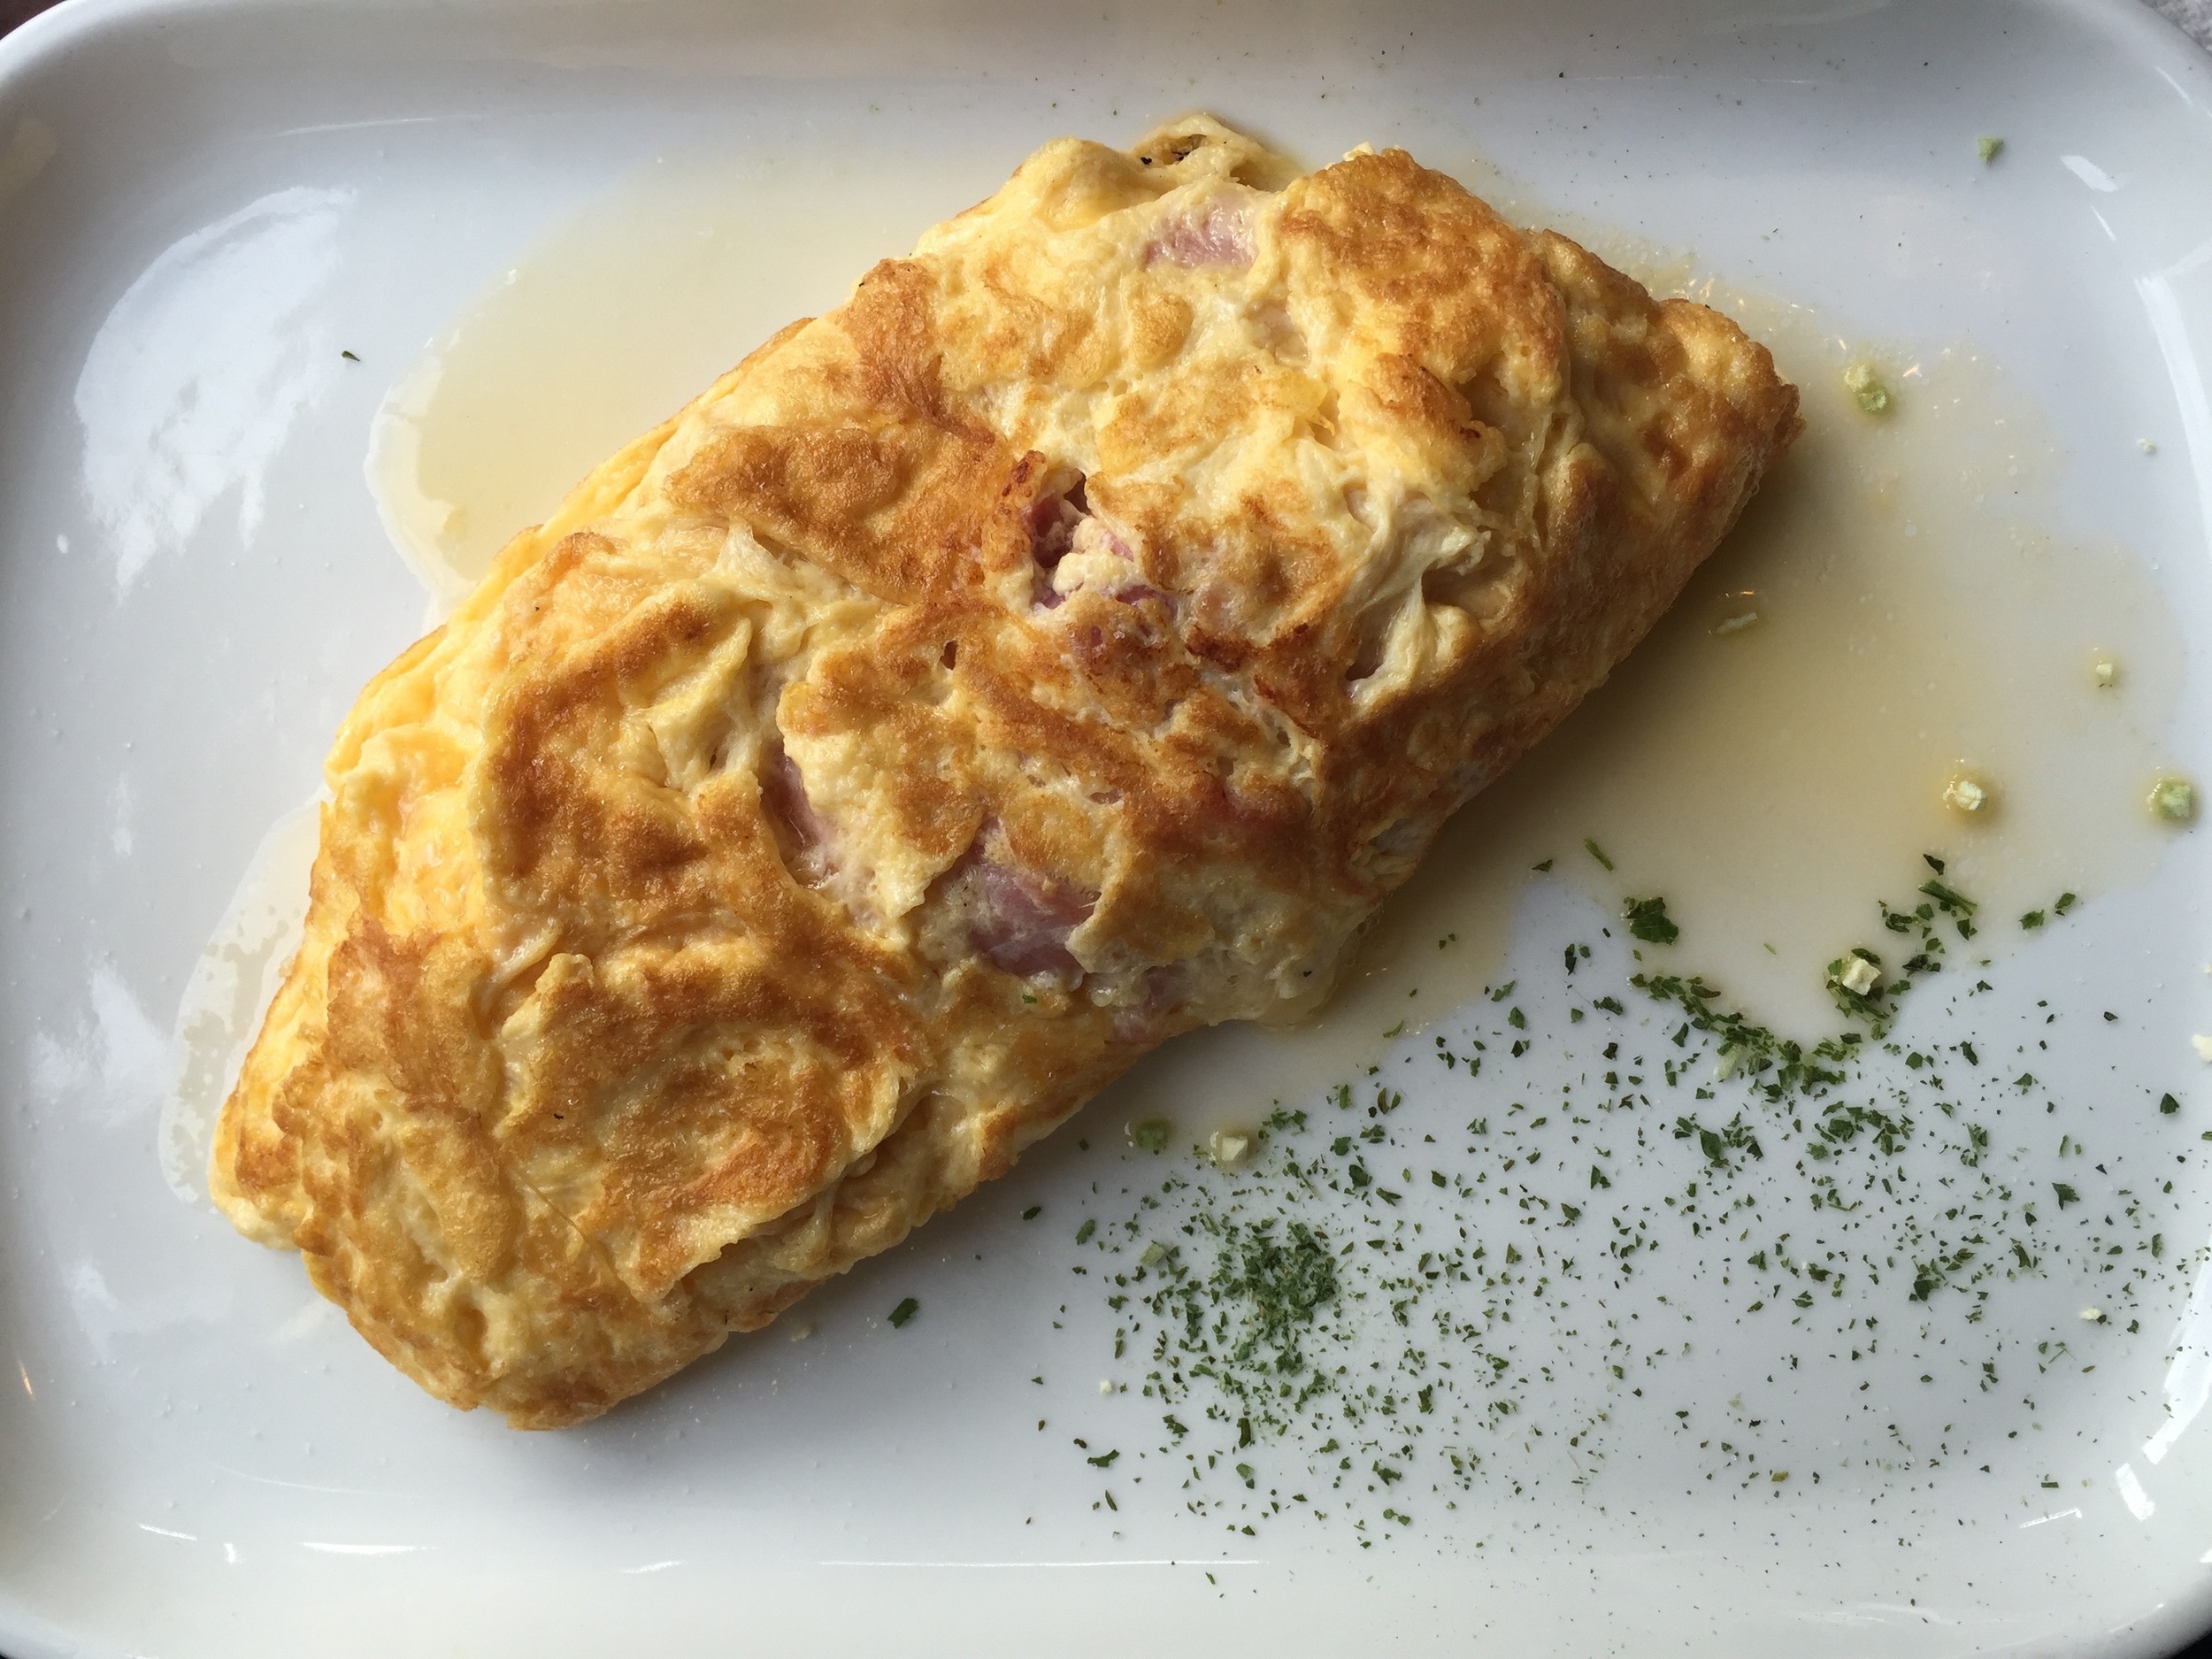 The best omelettes are in France